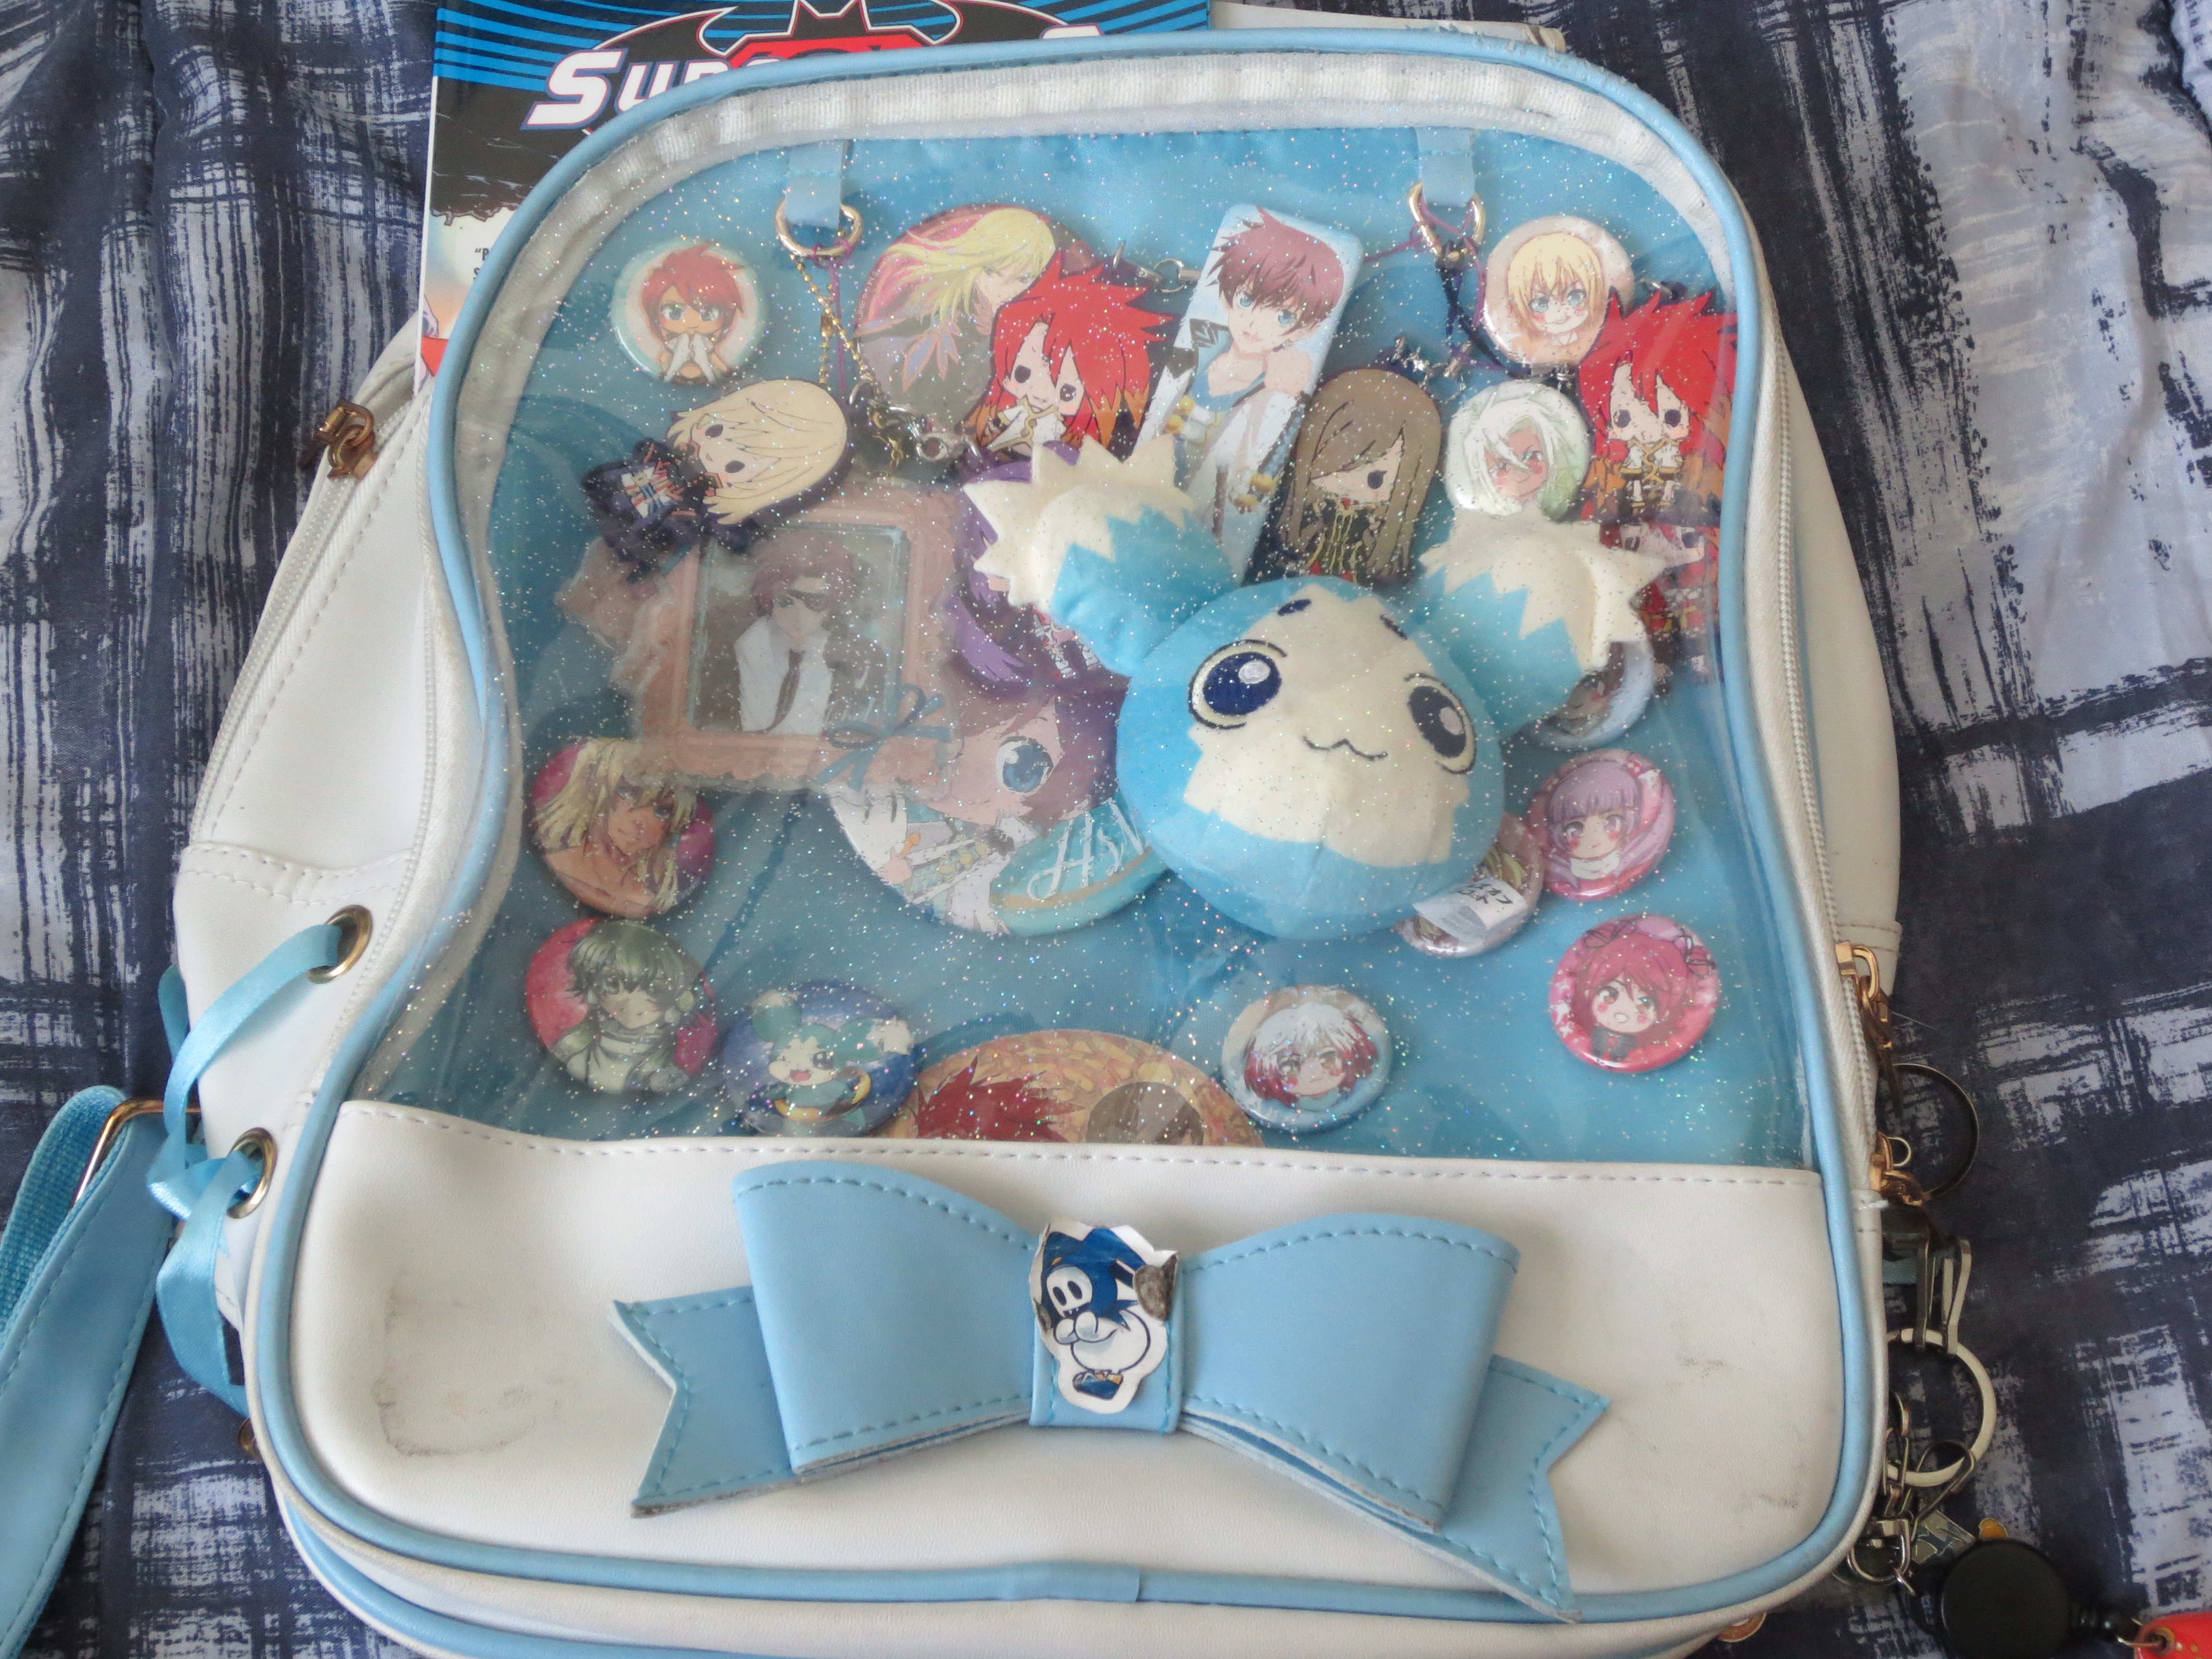 My ita-bag covered in Tales of Series merchandise